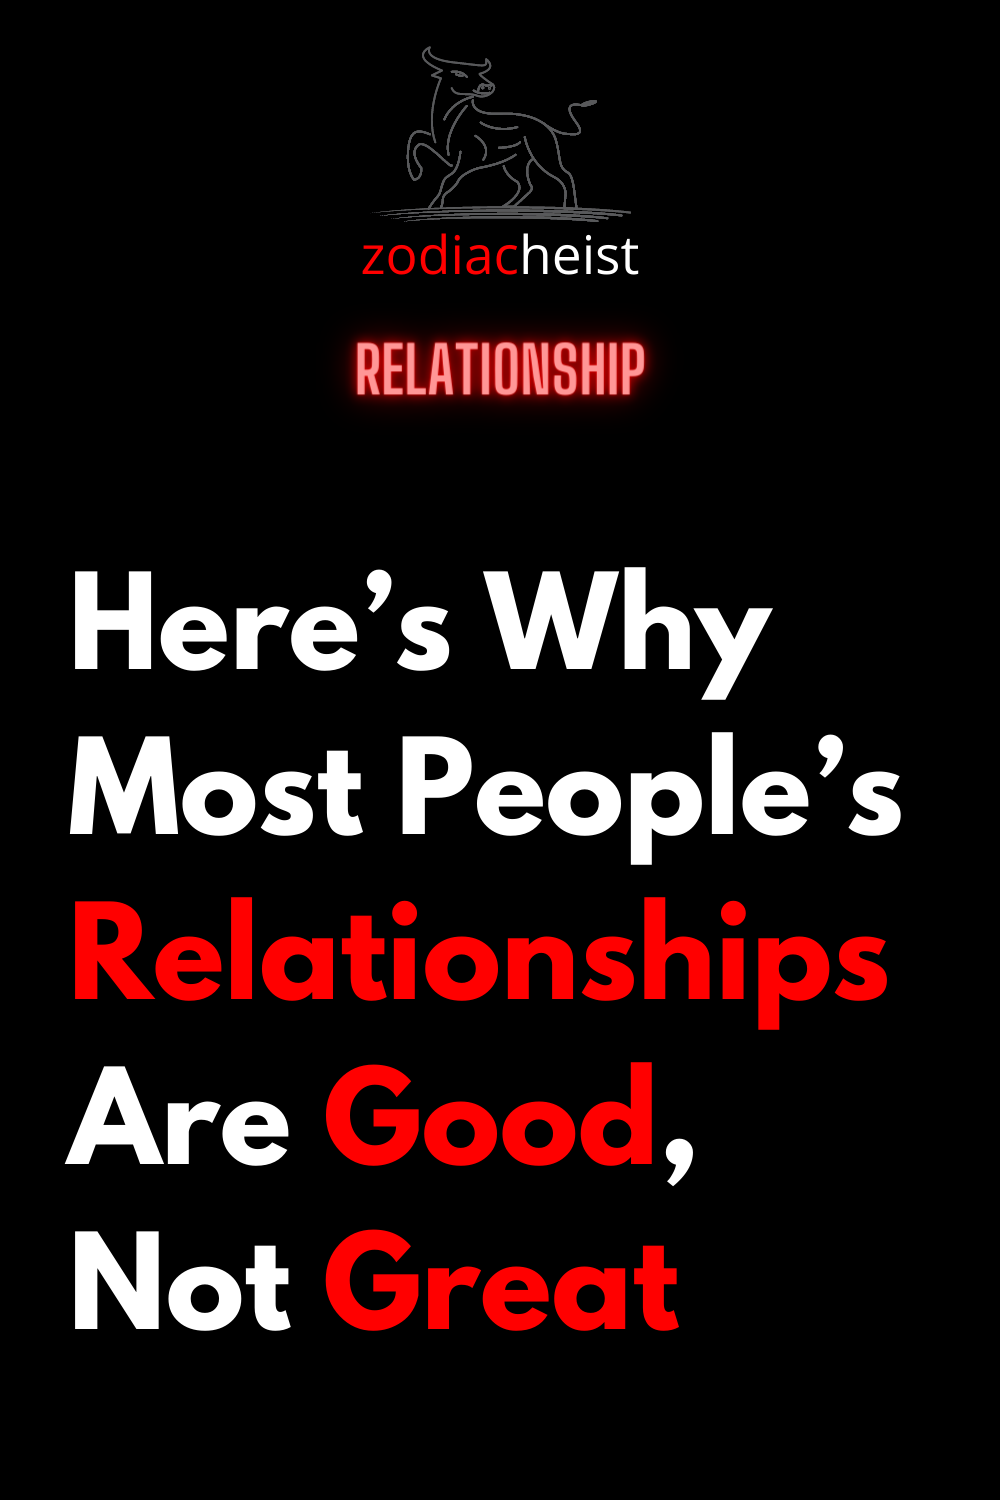 Here’s Why Most People’s Relationships Are Good, Not Great